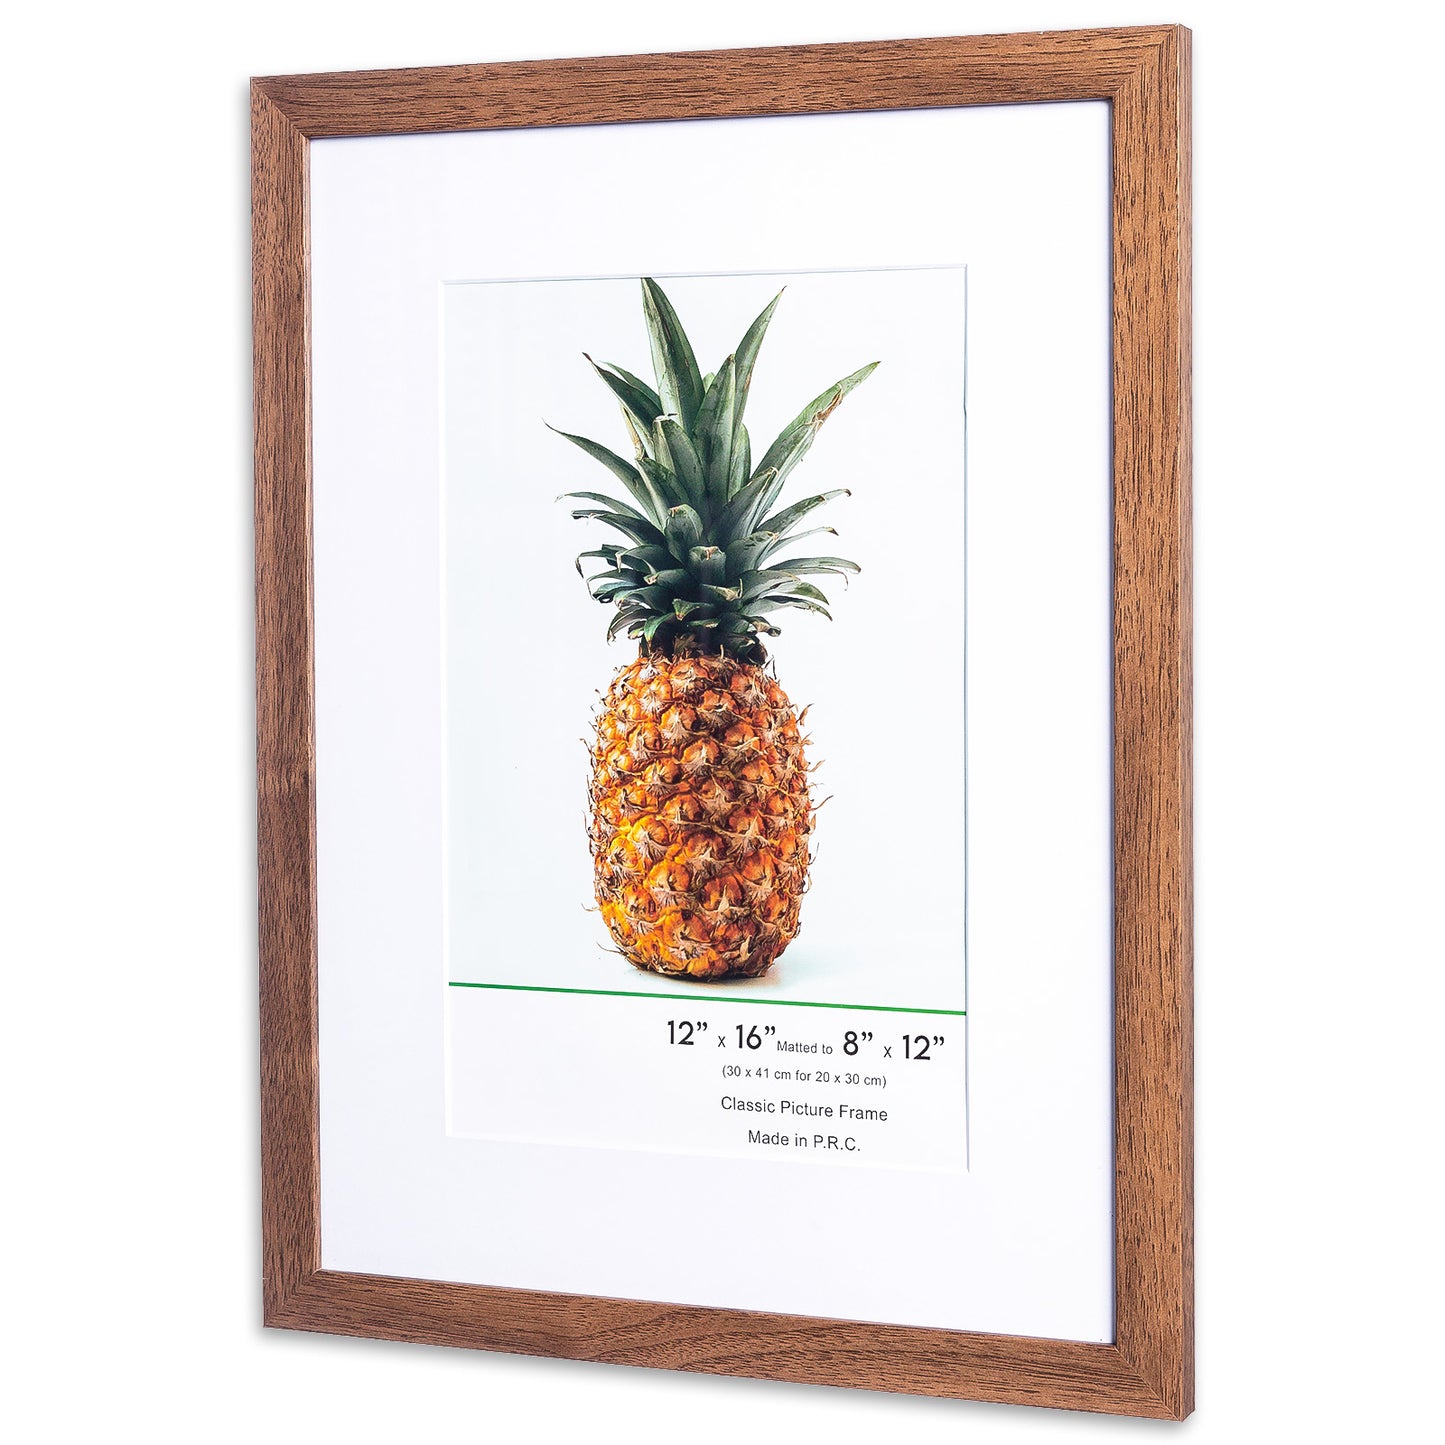 12" x 16” Classic Dark Oak MDF Wood Picture Frame with Tempered Glass, 8" x 12" Matted